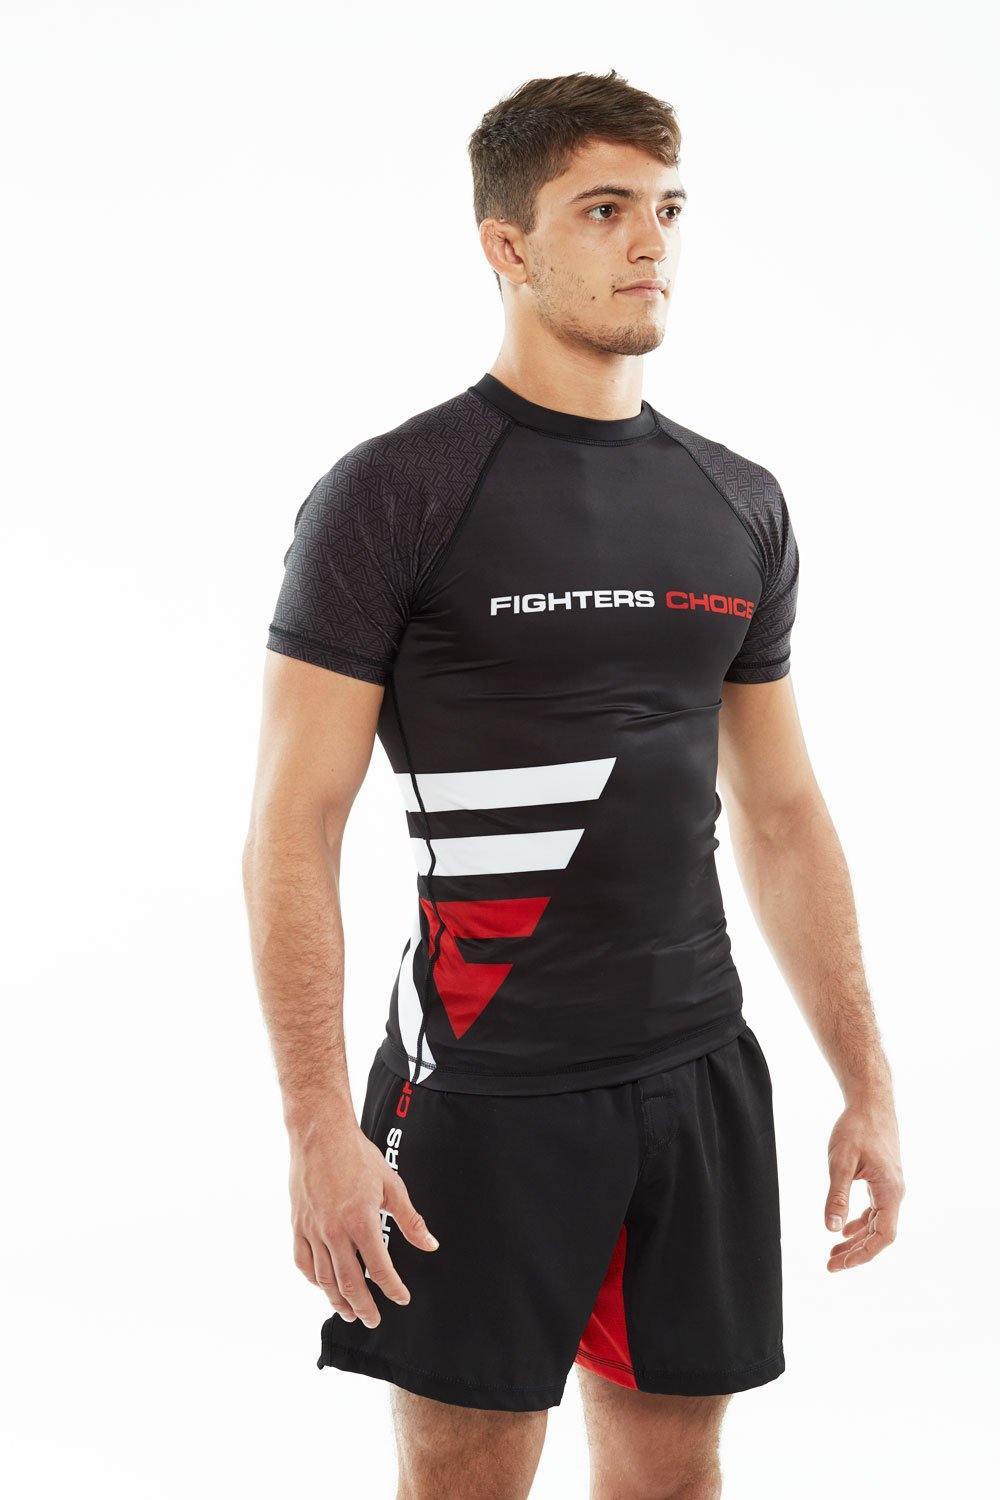 Fighters Choice Short Sleeve Rash Guard - Take Over - For Men and Women